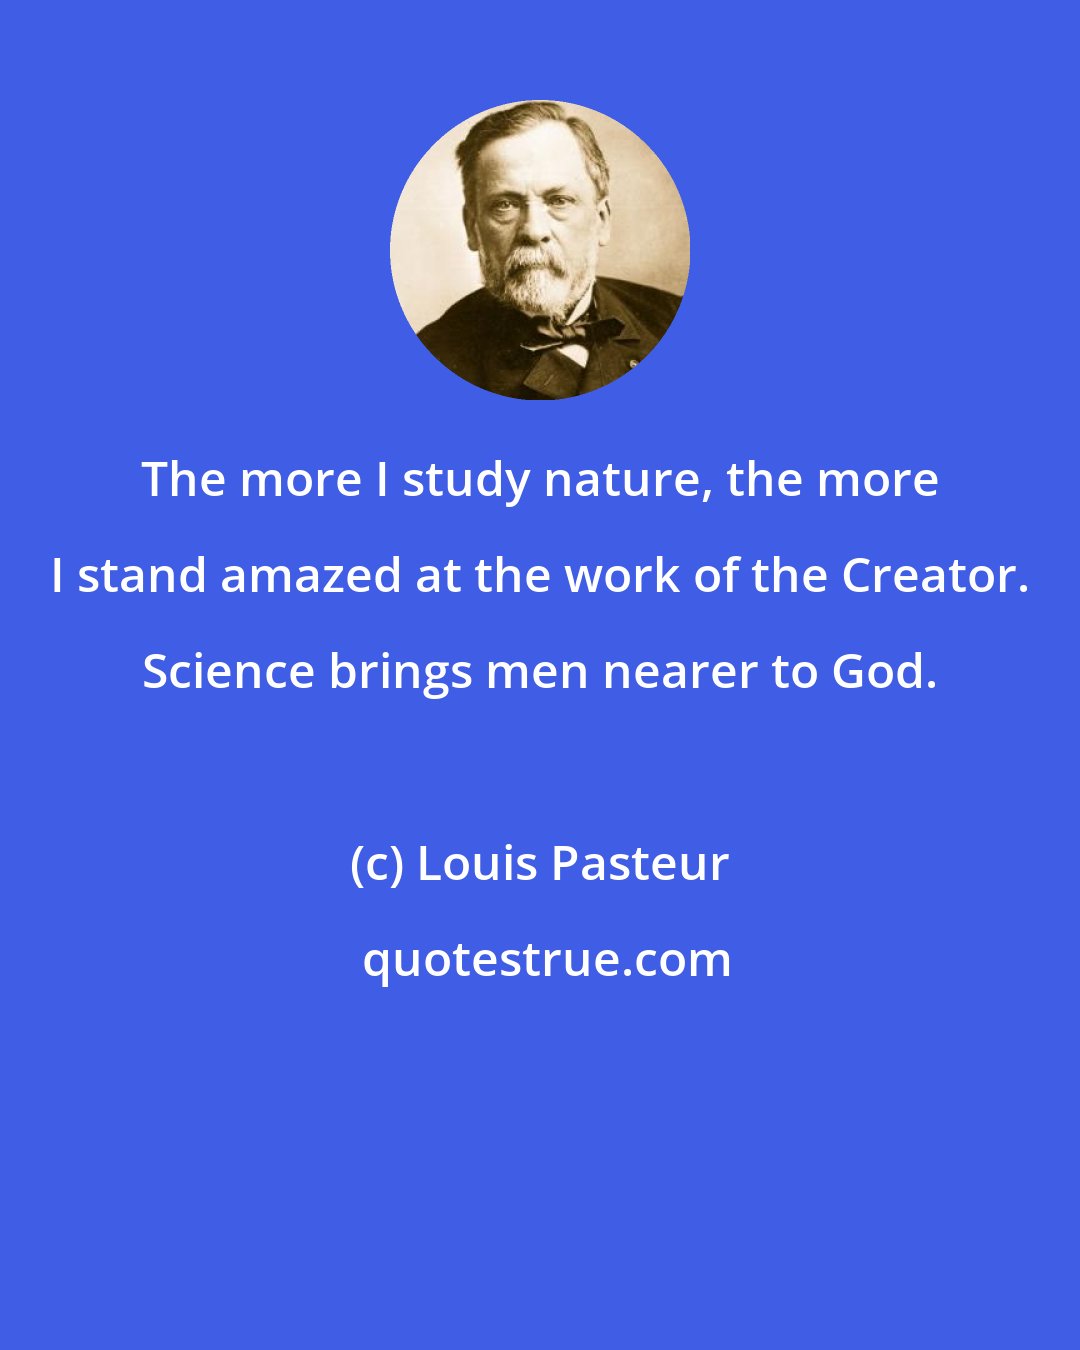 Louis Pasteur: The more I study nature, the more I stand amazed at the work of the Creator. Science brings men nearer to God.